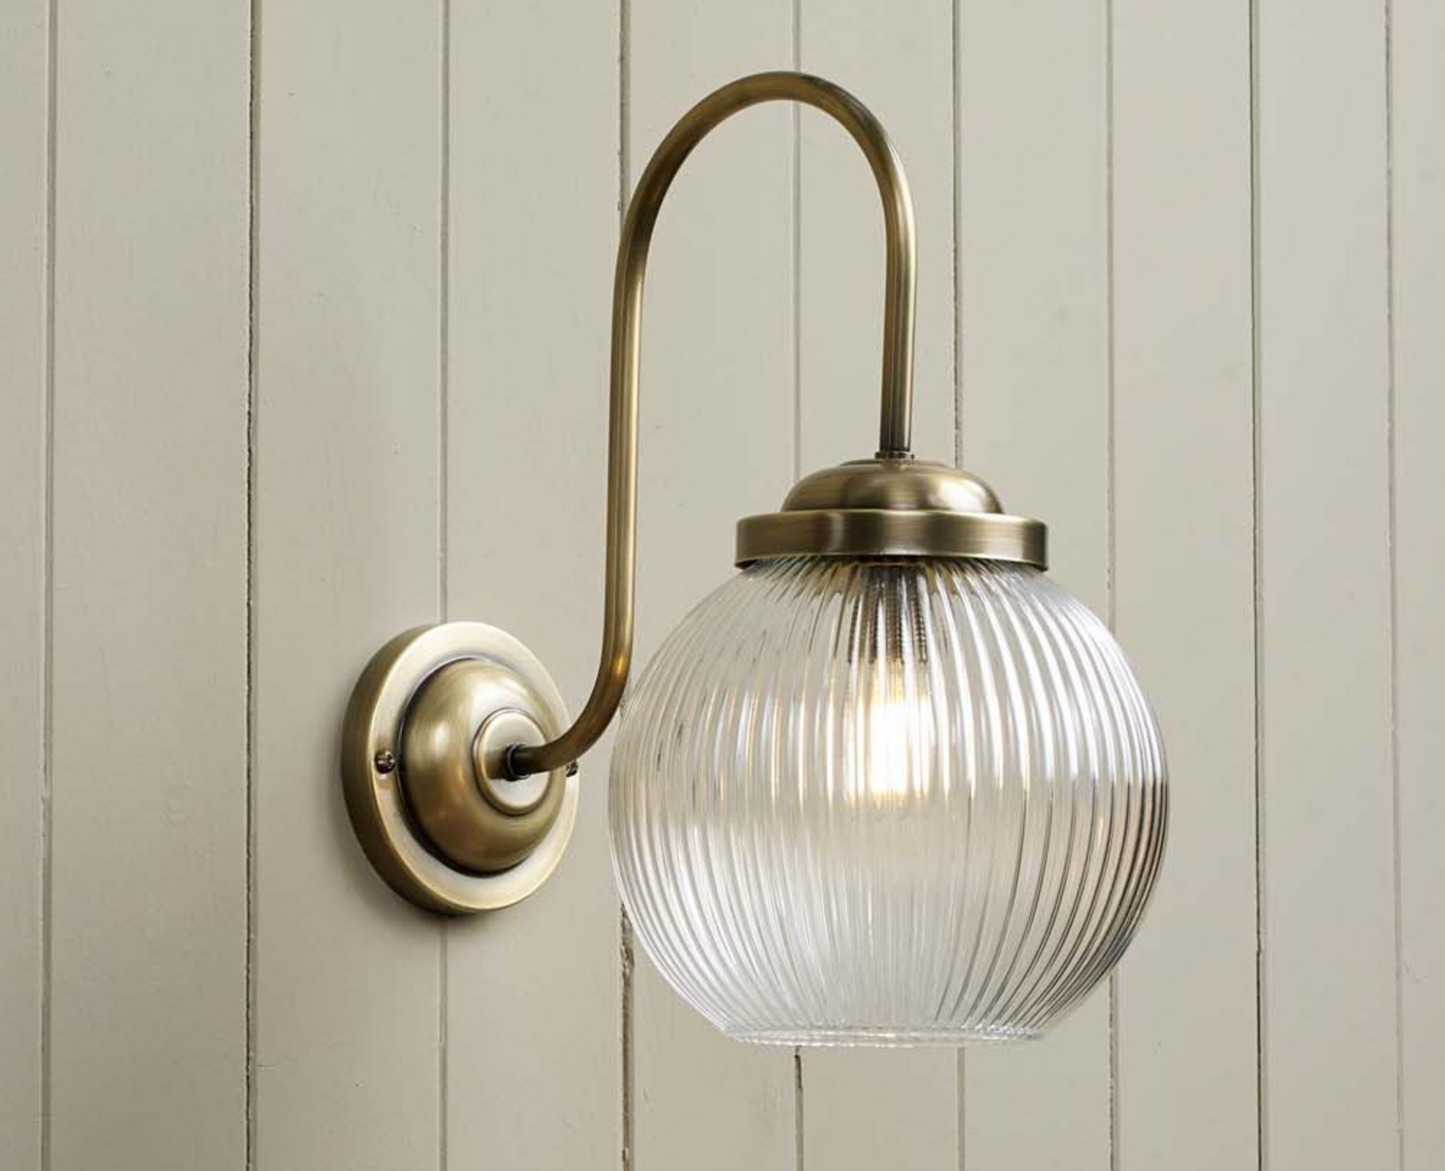 Cam 2 Antique Brass Swan Neck Wall Light with Prismatic Globe - ID 10328